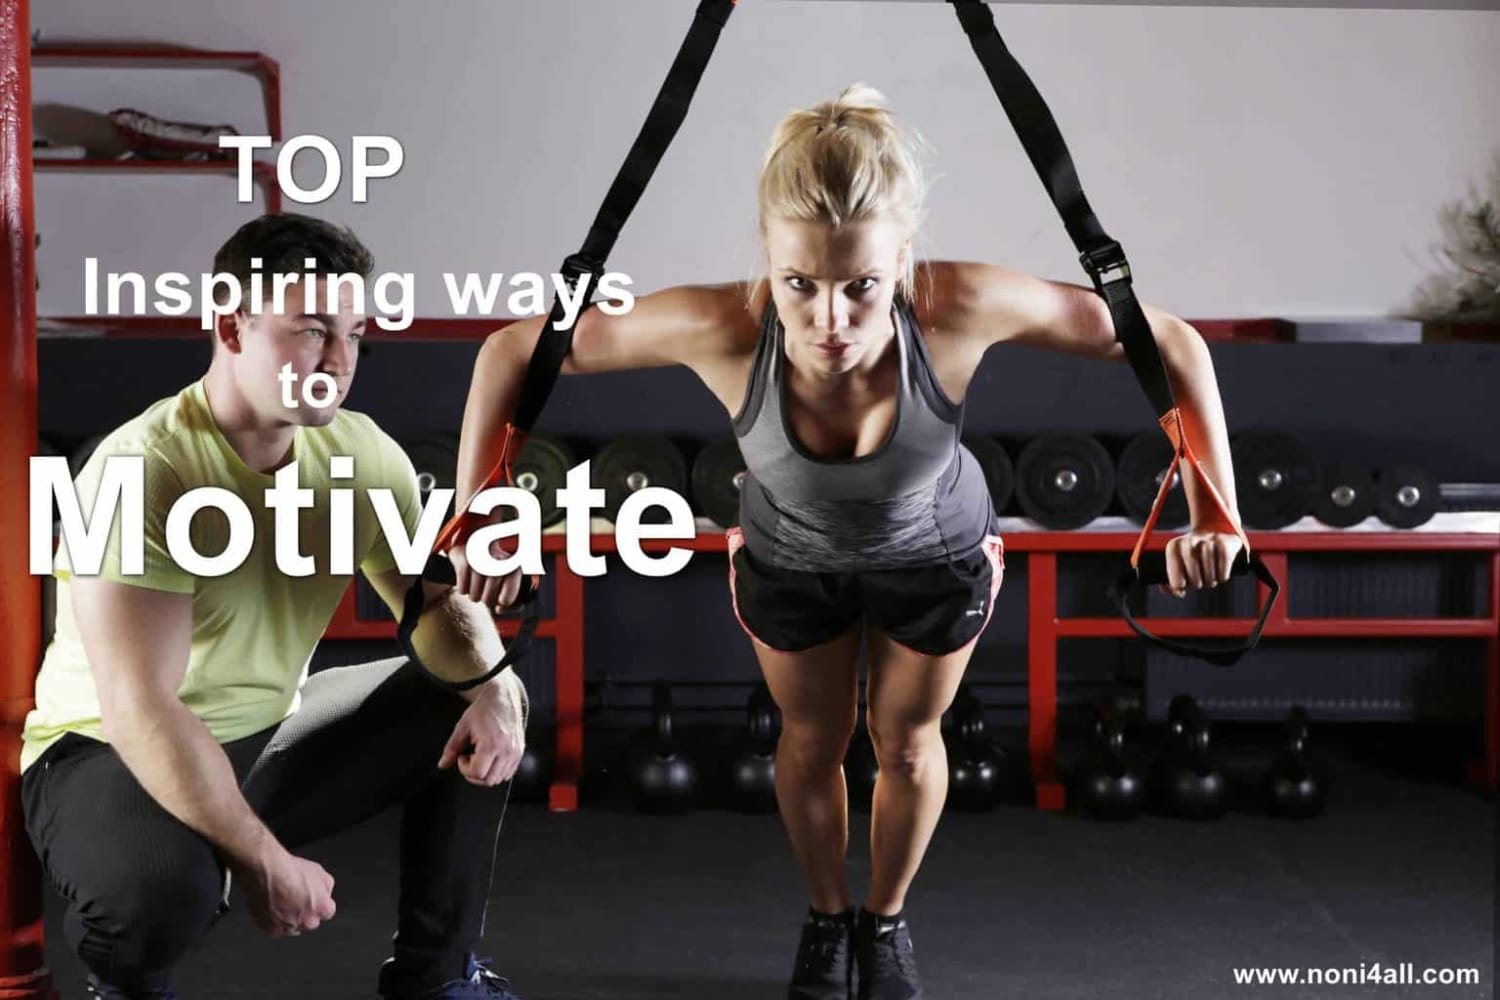 Motivation To Loss Weight: Top 8 Inspiring Ways To Motivate